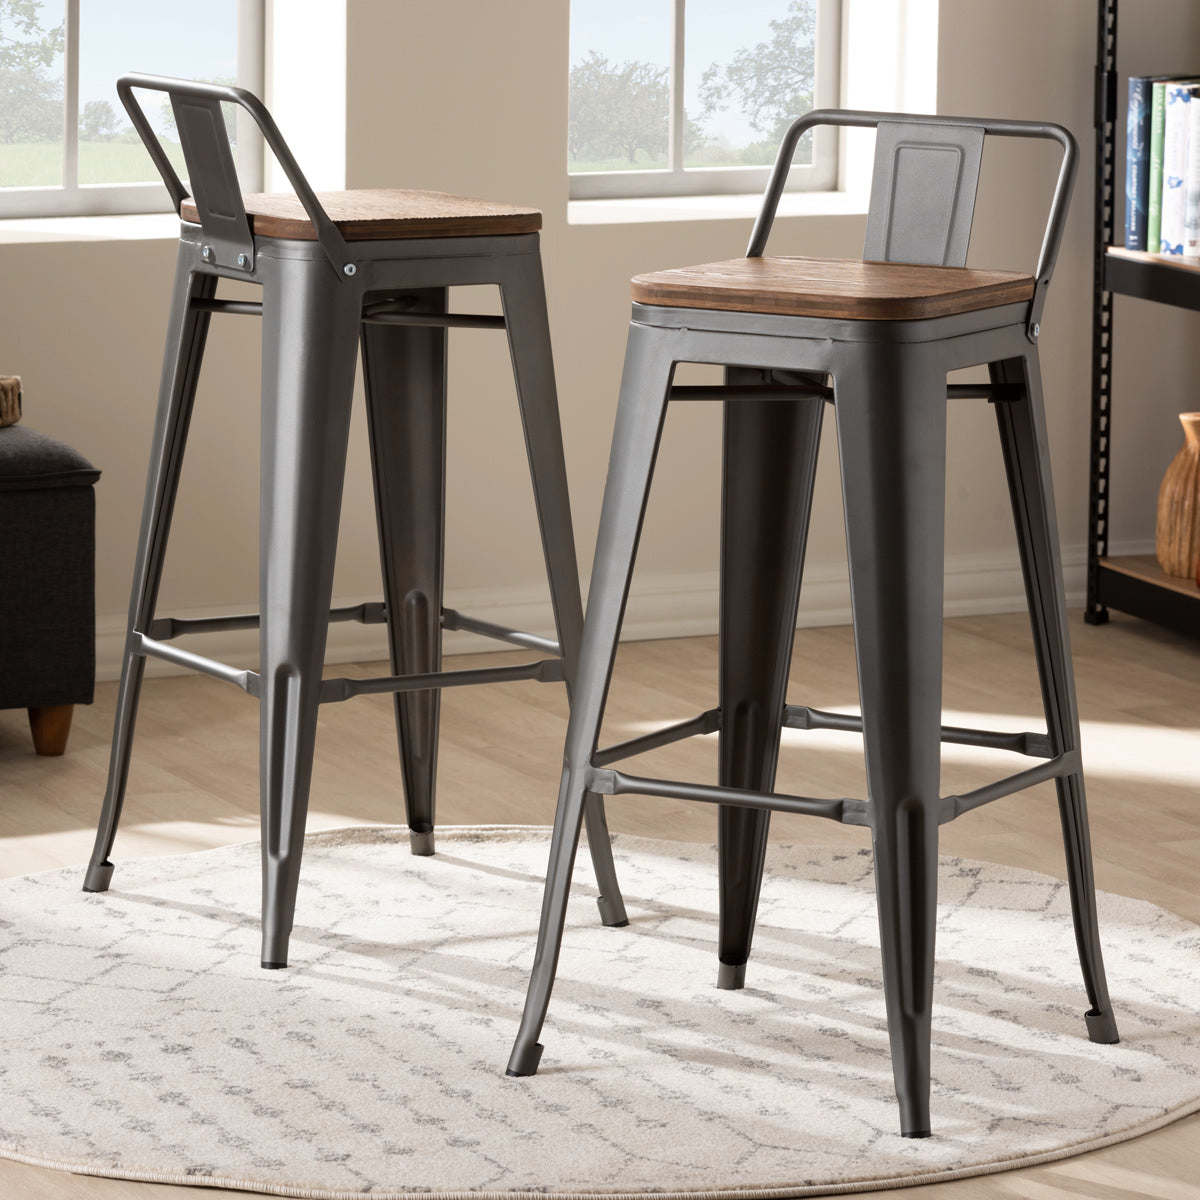 Baxton Studio Henri Vintage Rustic Industrial Style Tolix-Inspired Bamboo and Gun Metal-Finished Steel Stackable Bar Stool with Backrest Set Baxton Studio-Bar Stools-Minimal And Modern - 5